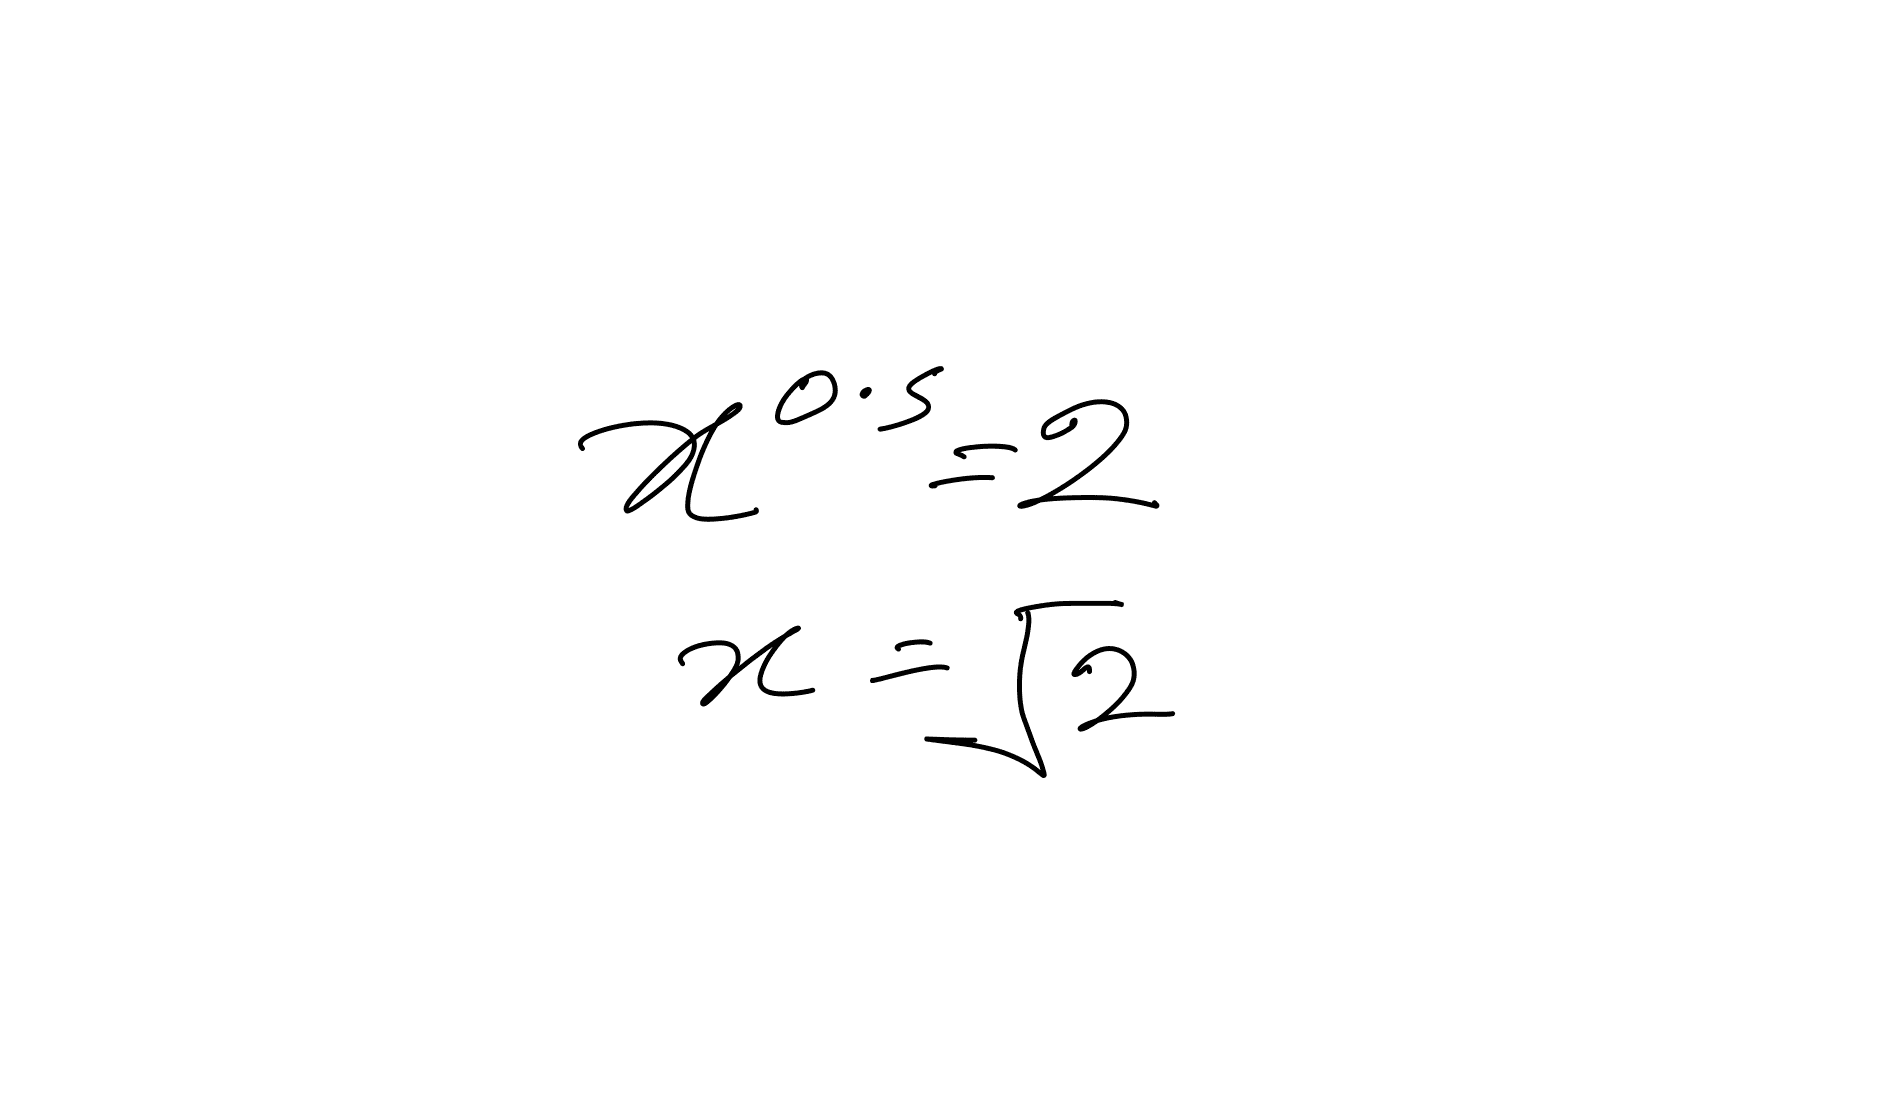 image showing a representation of the square root of 2 [→]